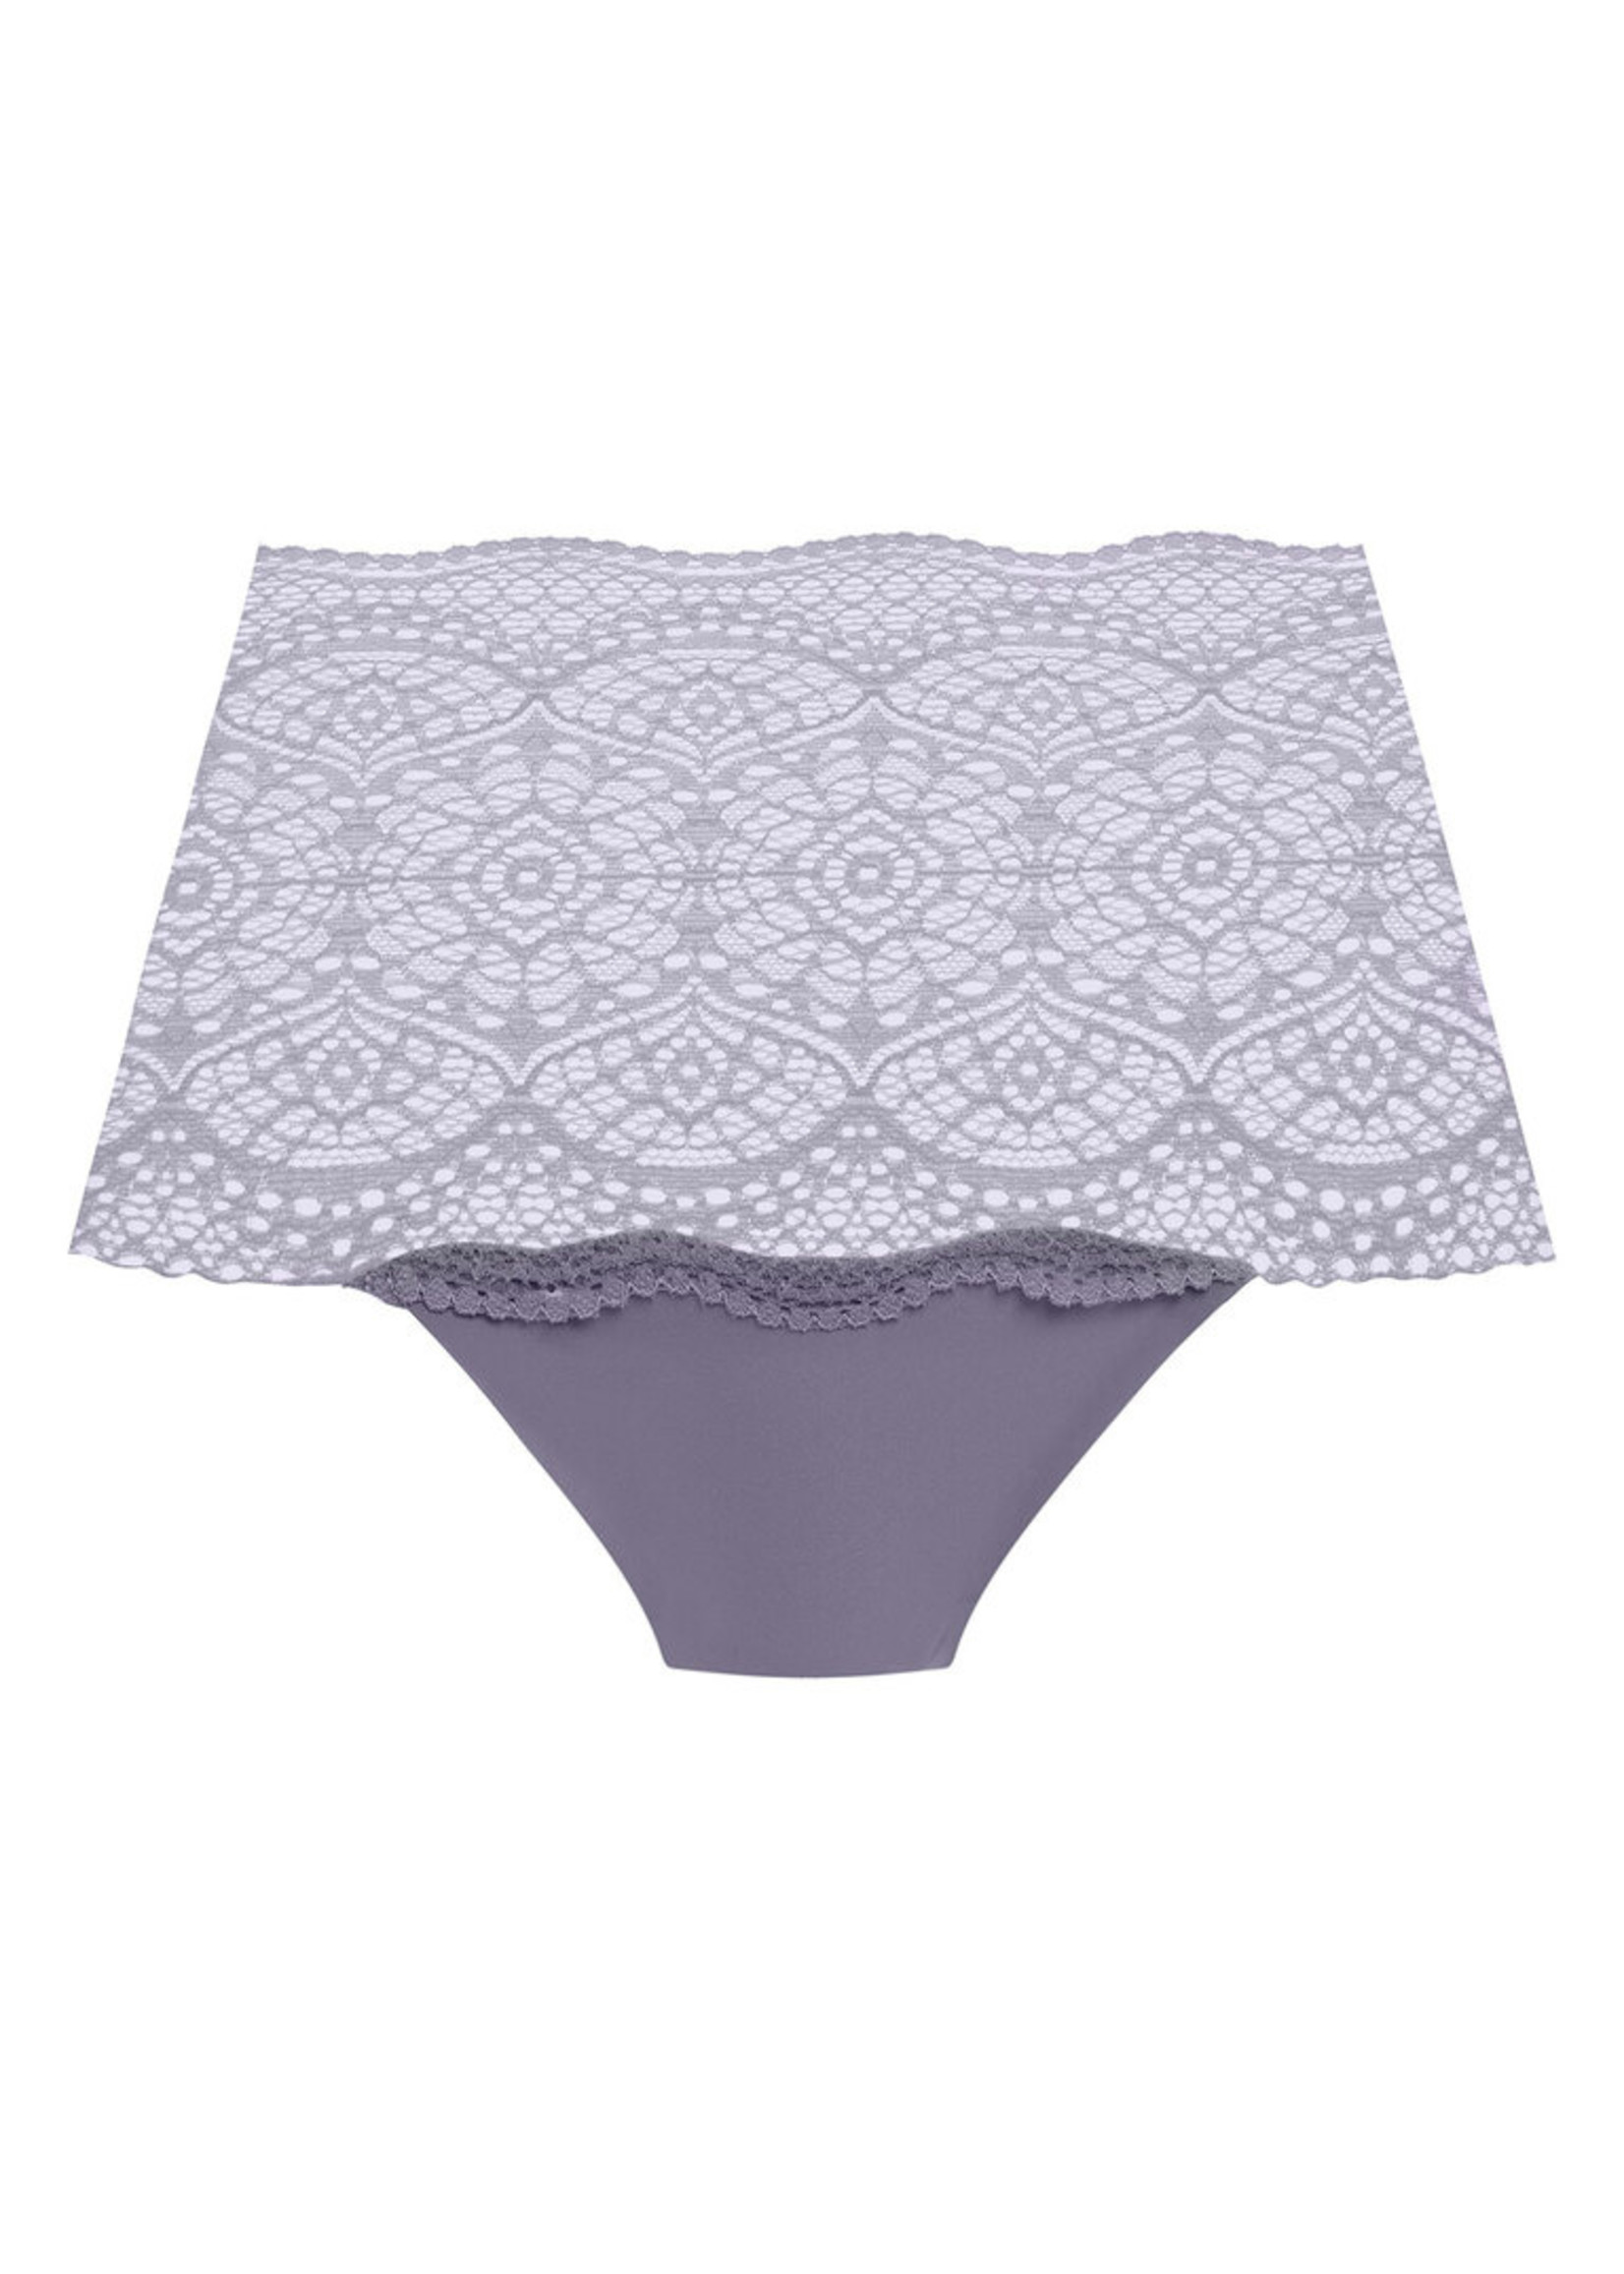 Fantasie Lace Ease Invisible Stretch Full Brief - Steel Blue